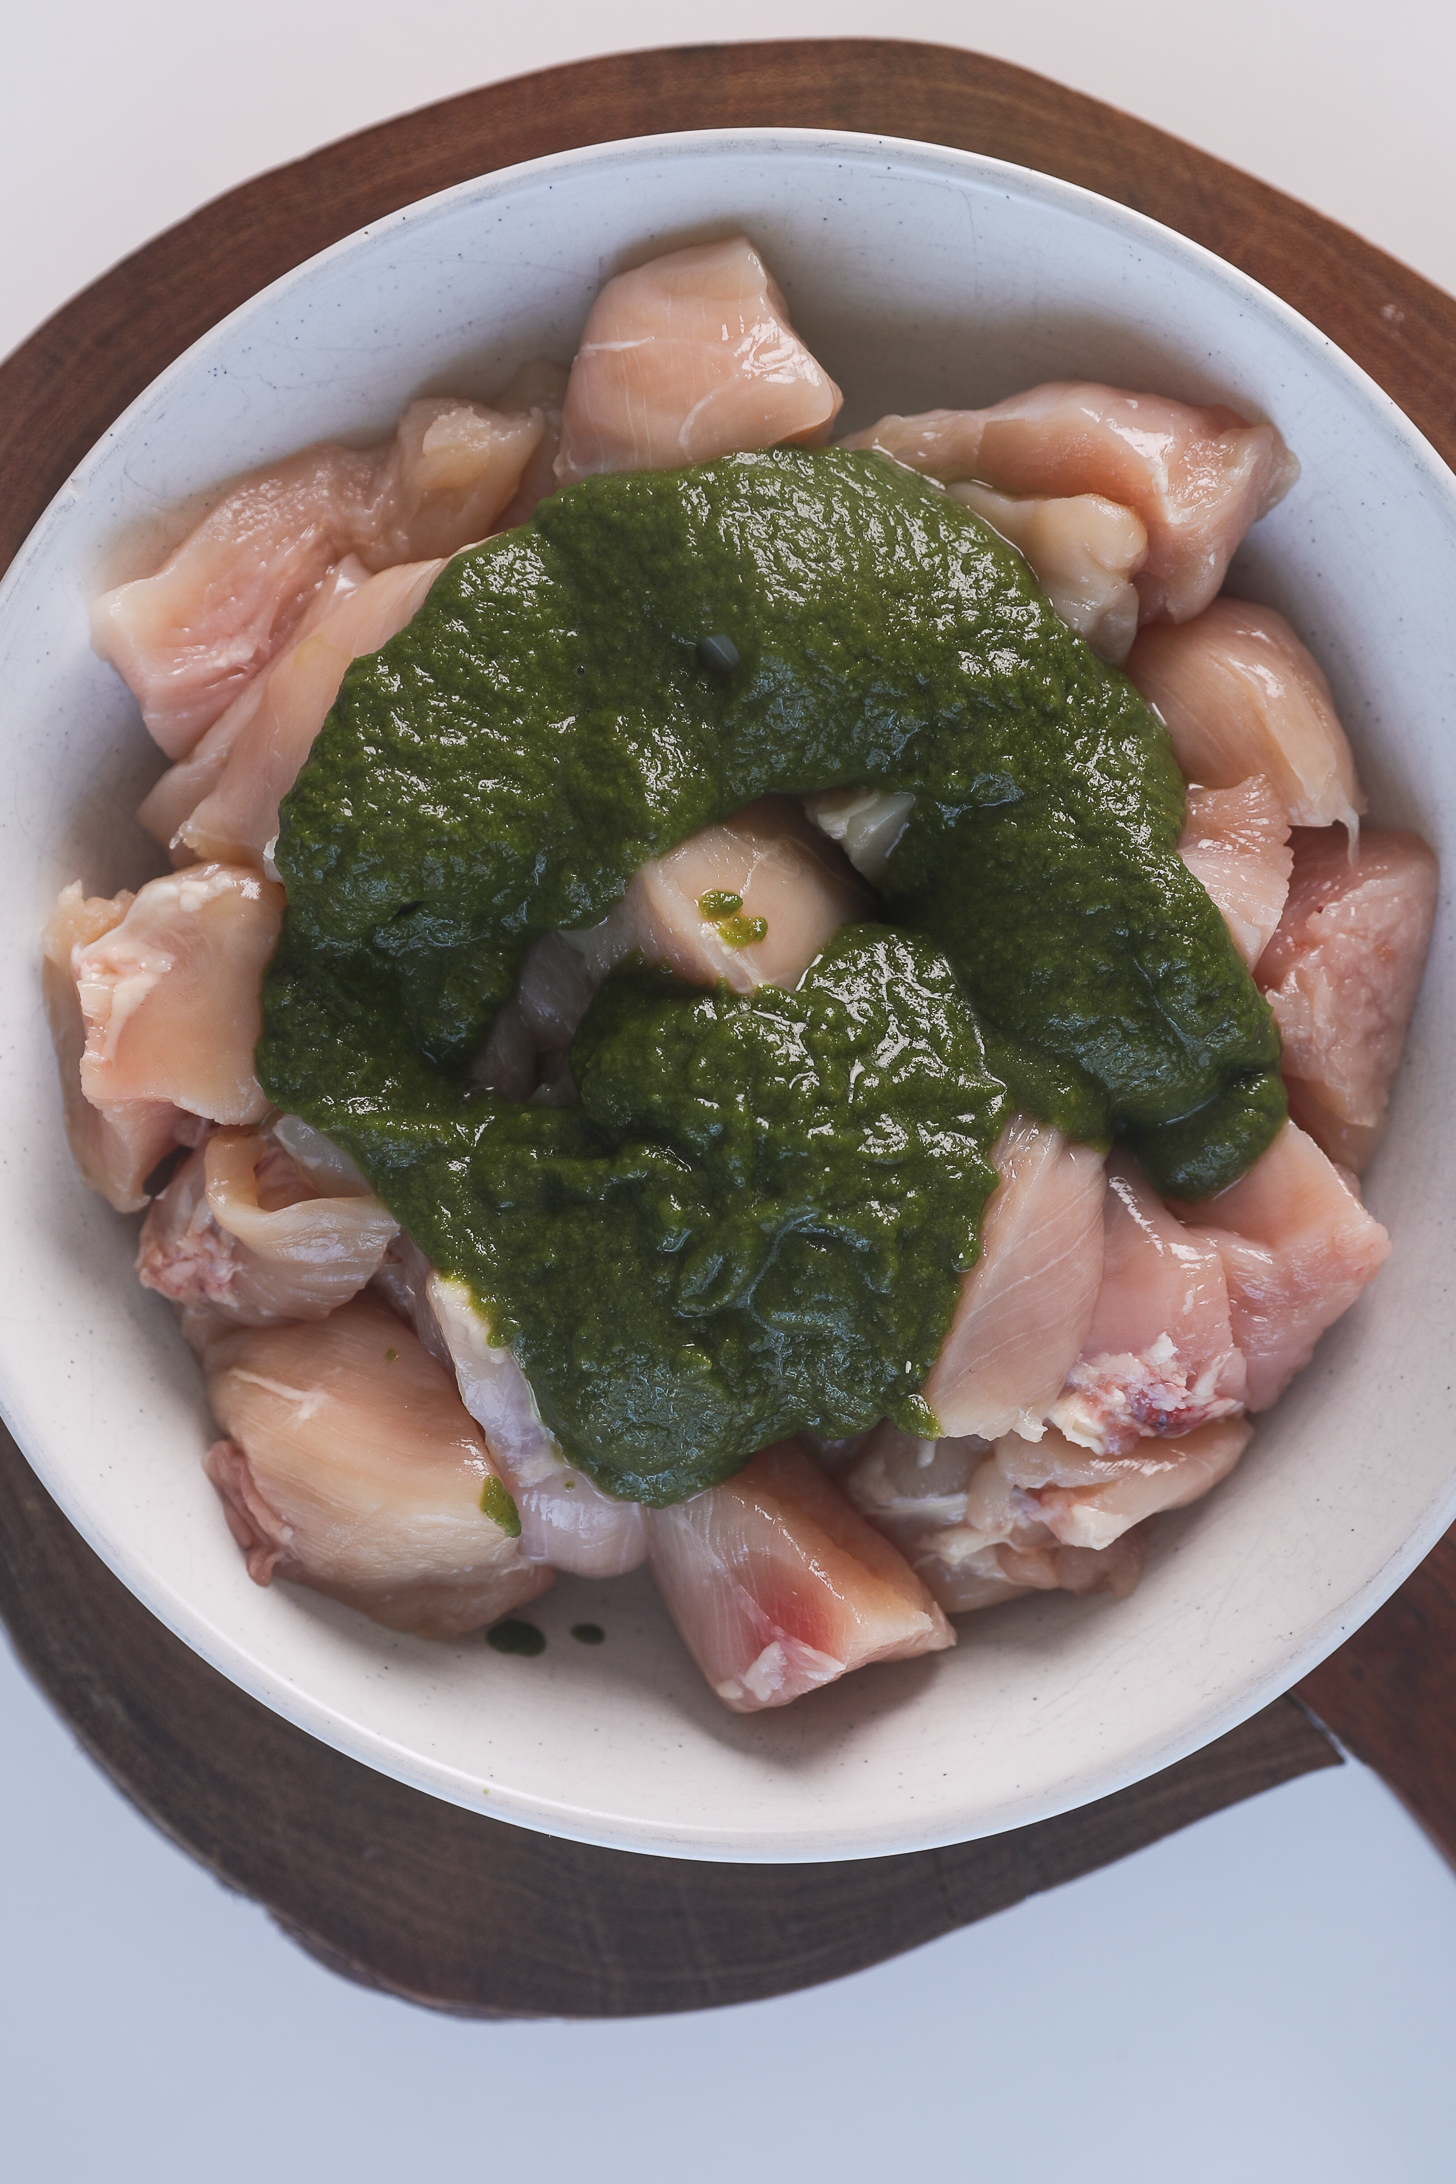 A green cilantro chutney (sauce) poured over a pile of chicken breast pieces in a bowl.